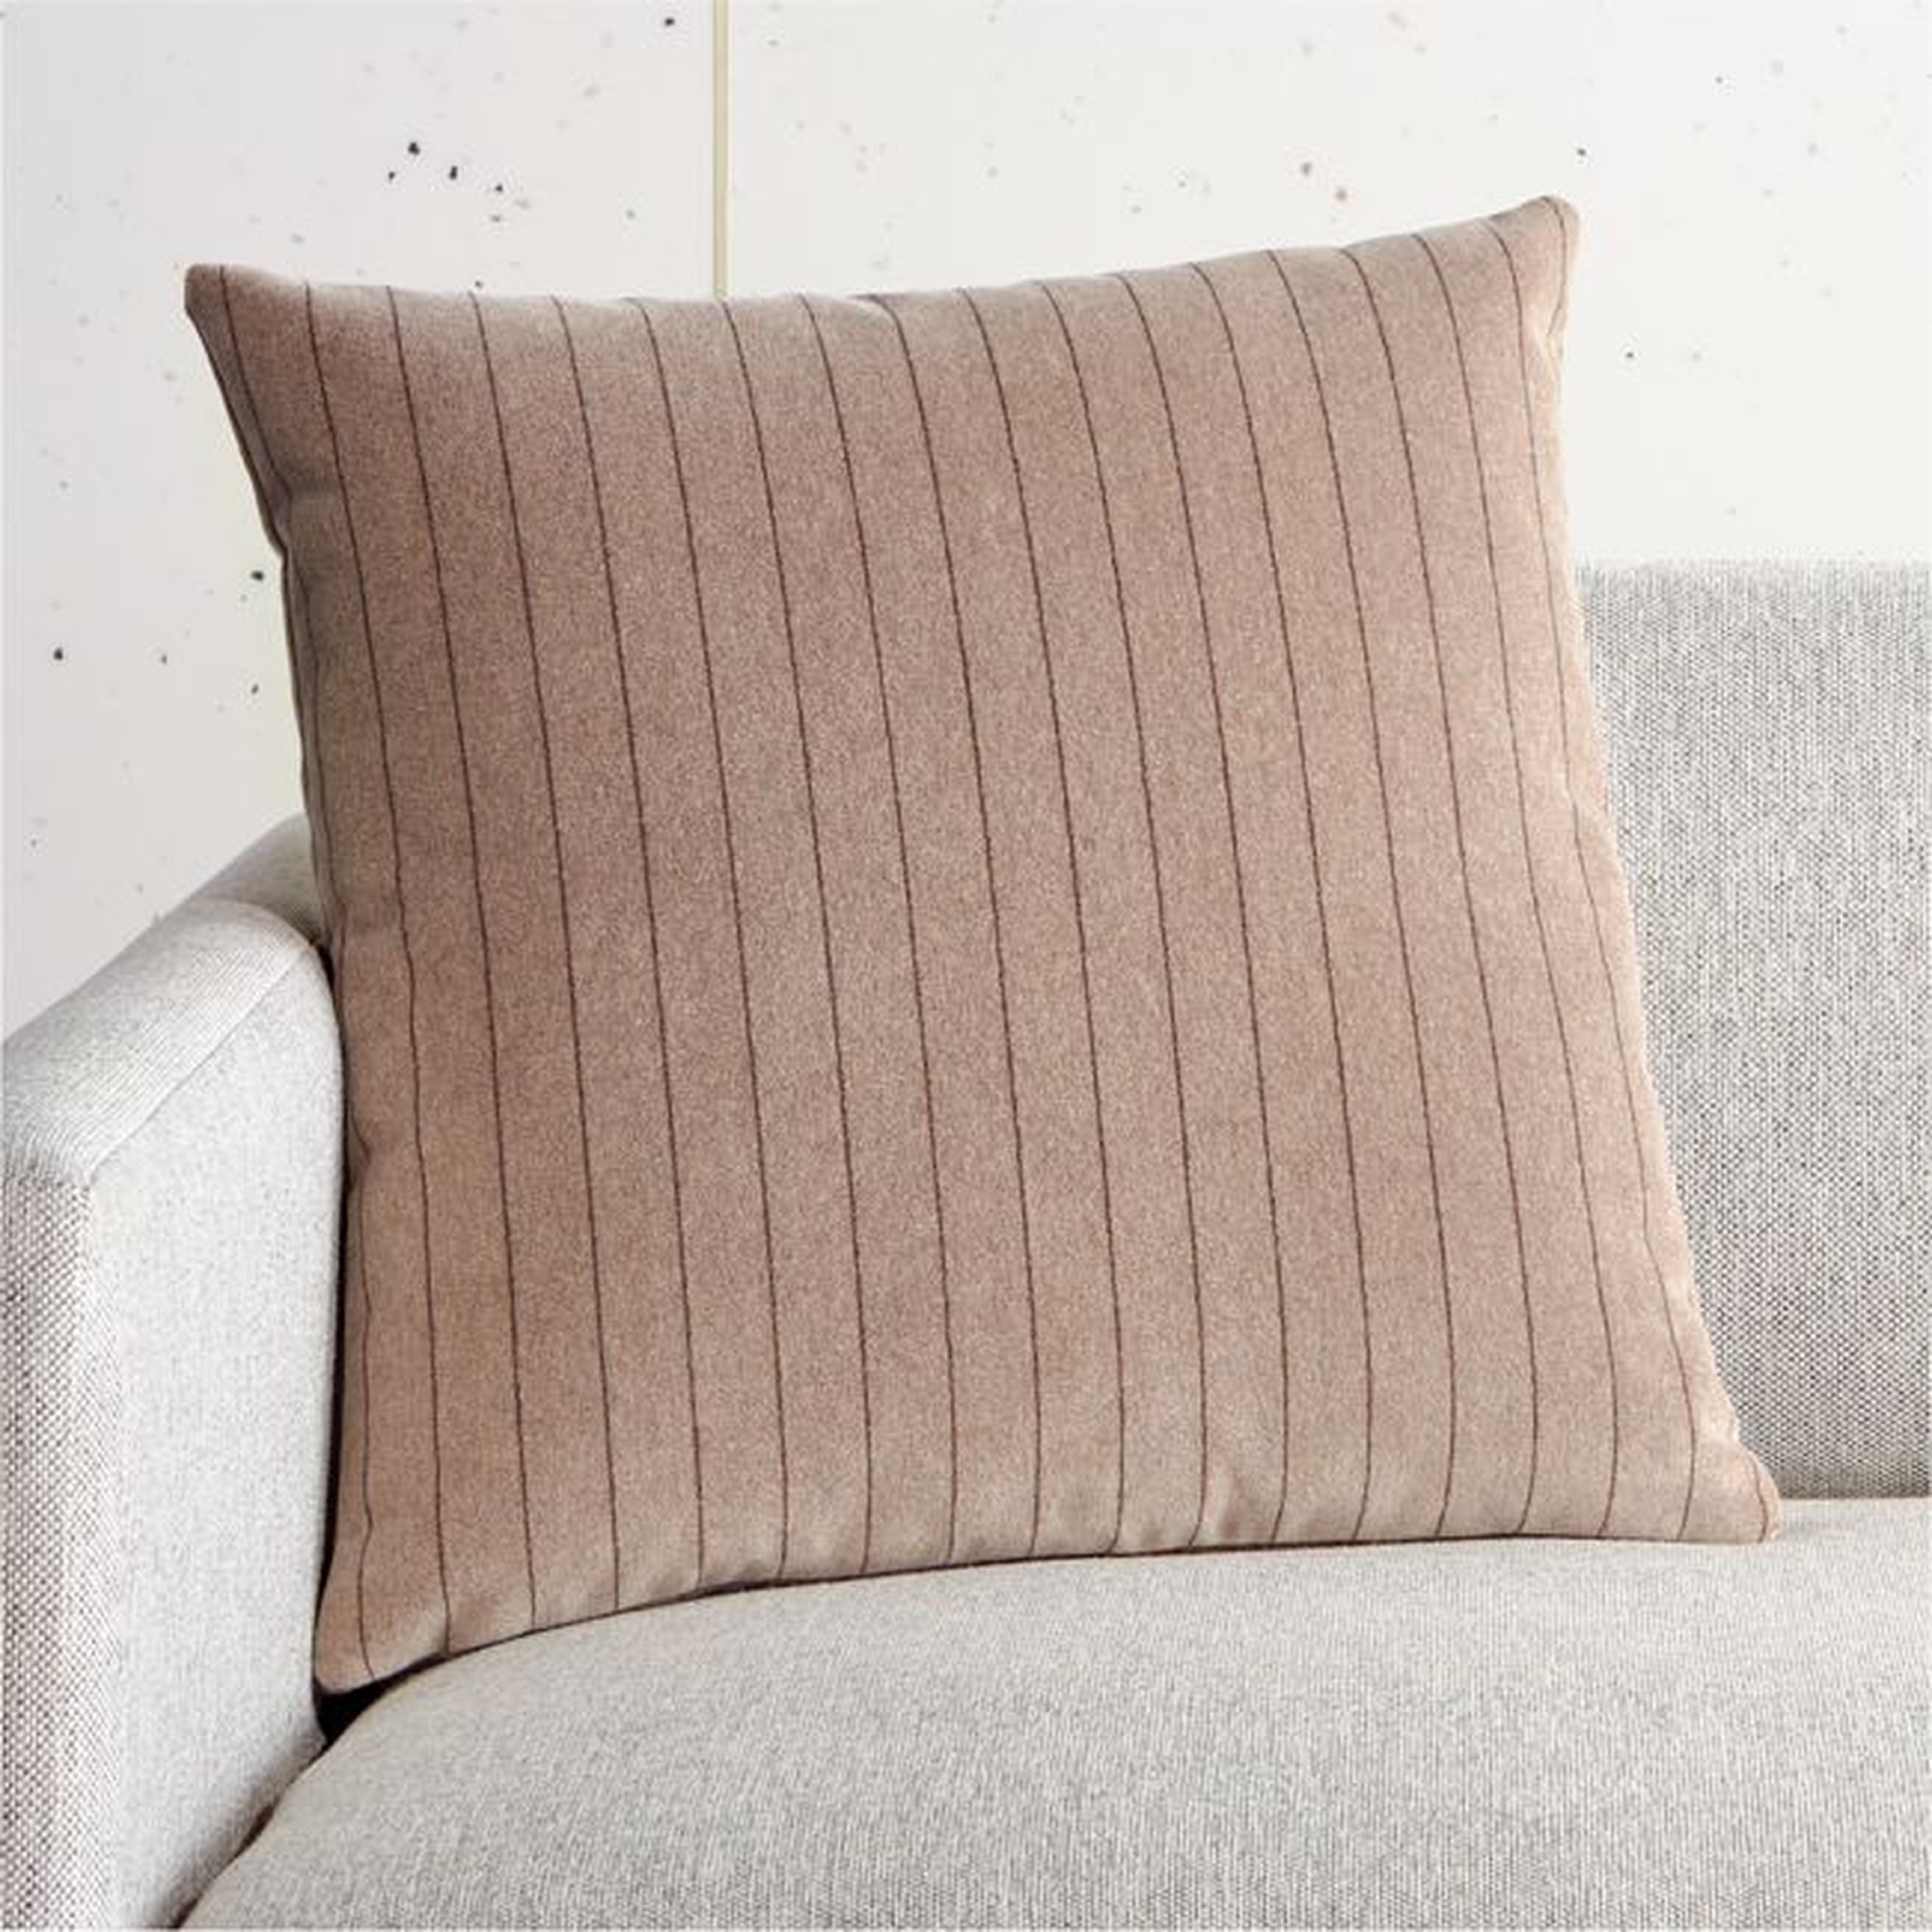 18" Boundary Light Brown Pillow with Feather-Down Insert - CB2